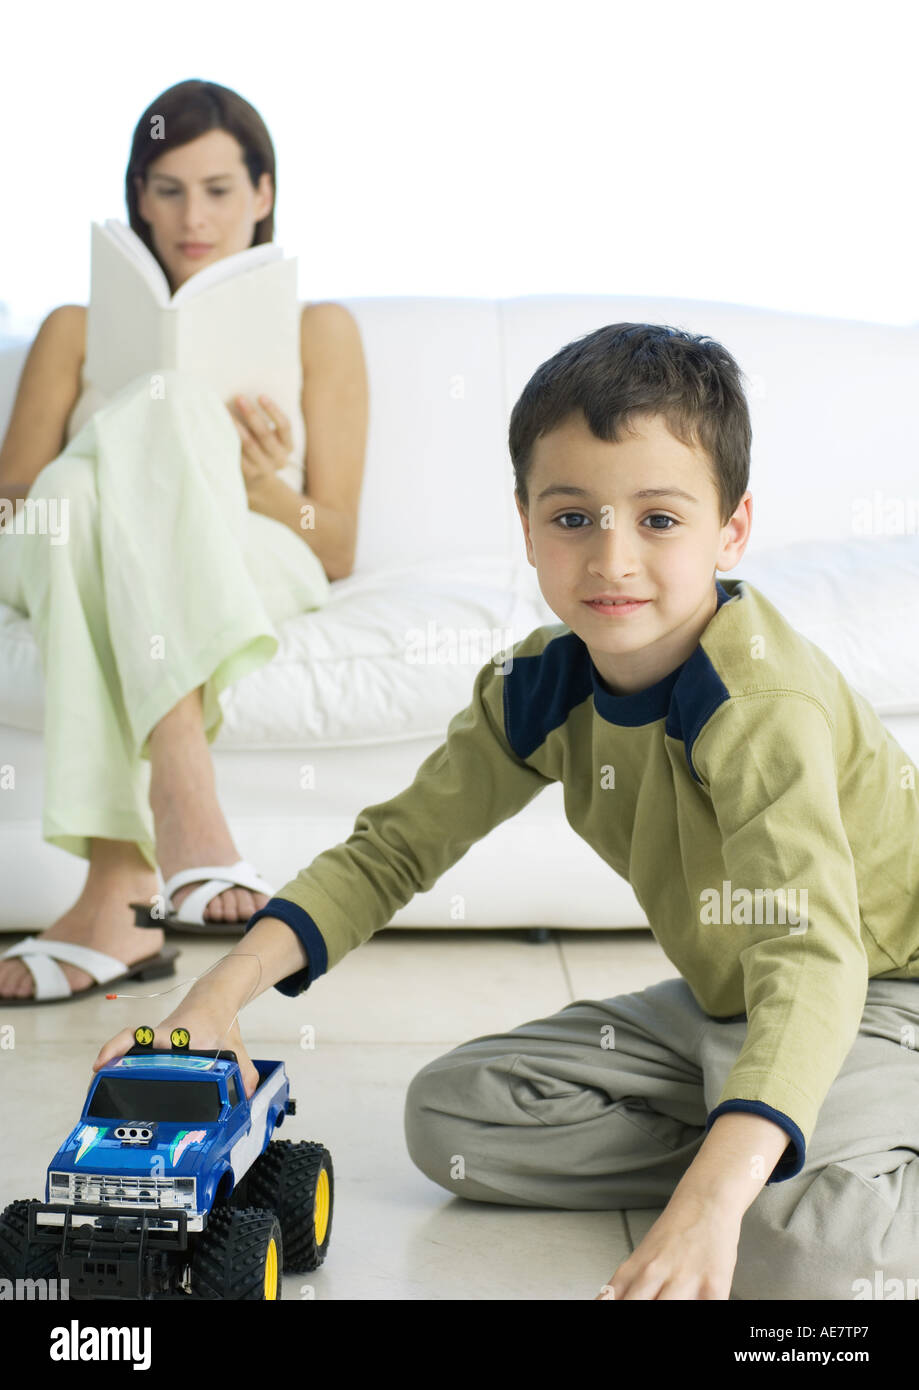 Boy playing with toy car while mother reads in background Stock Photo